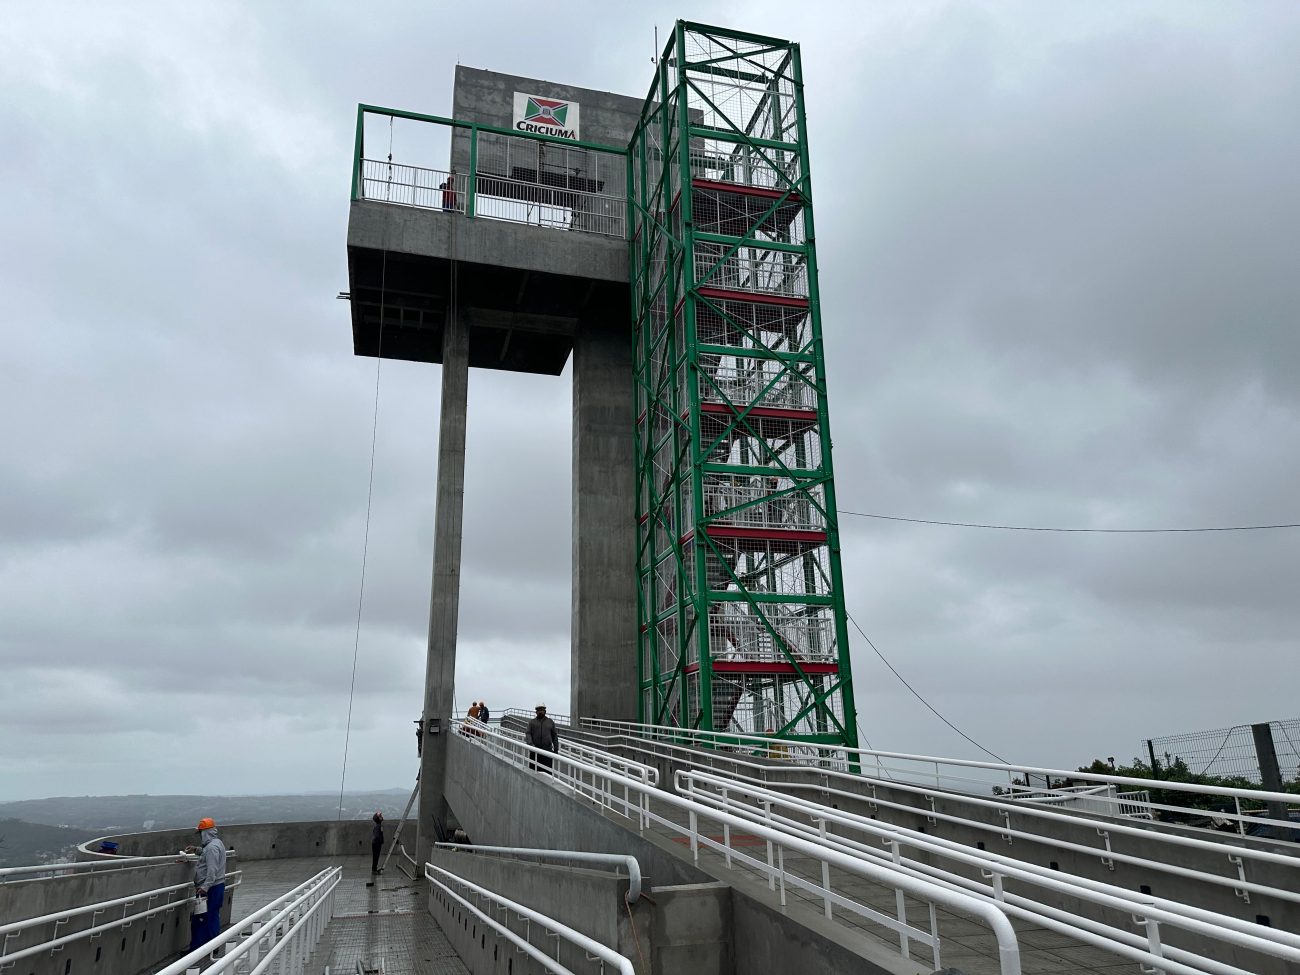 The observation deck is 30 meters high and has three viewing platforms - Luana Miguel/North Dakota.